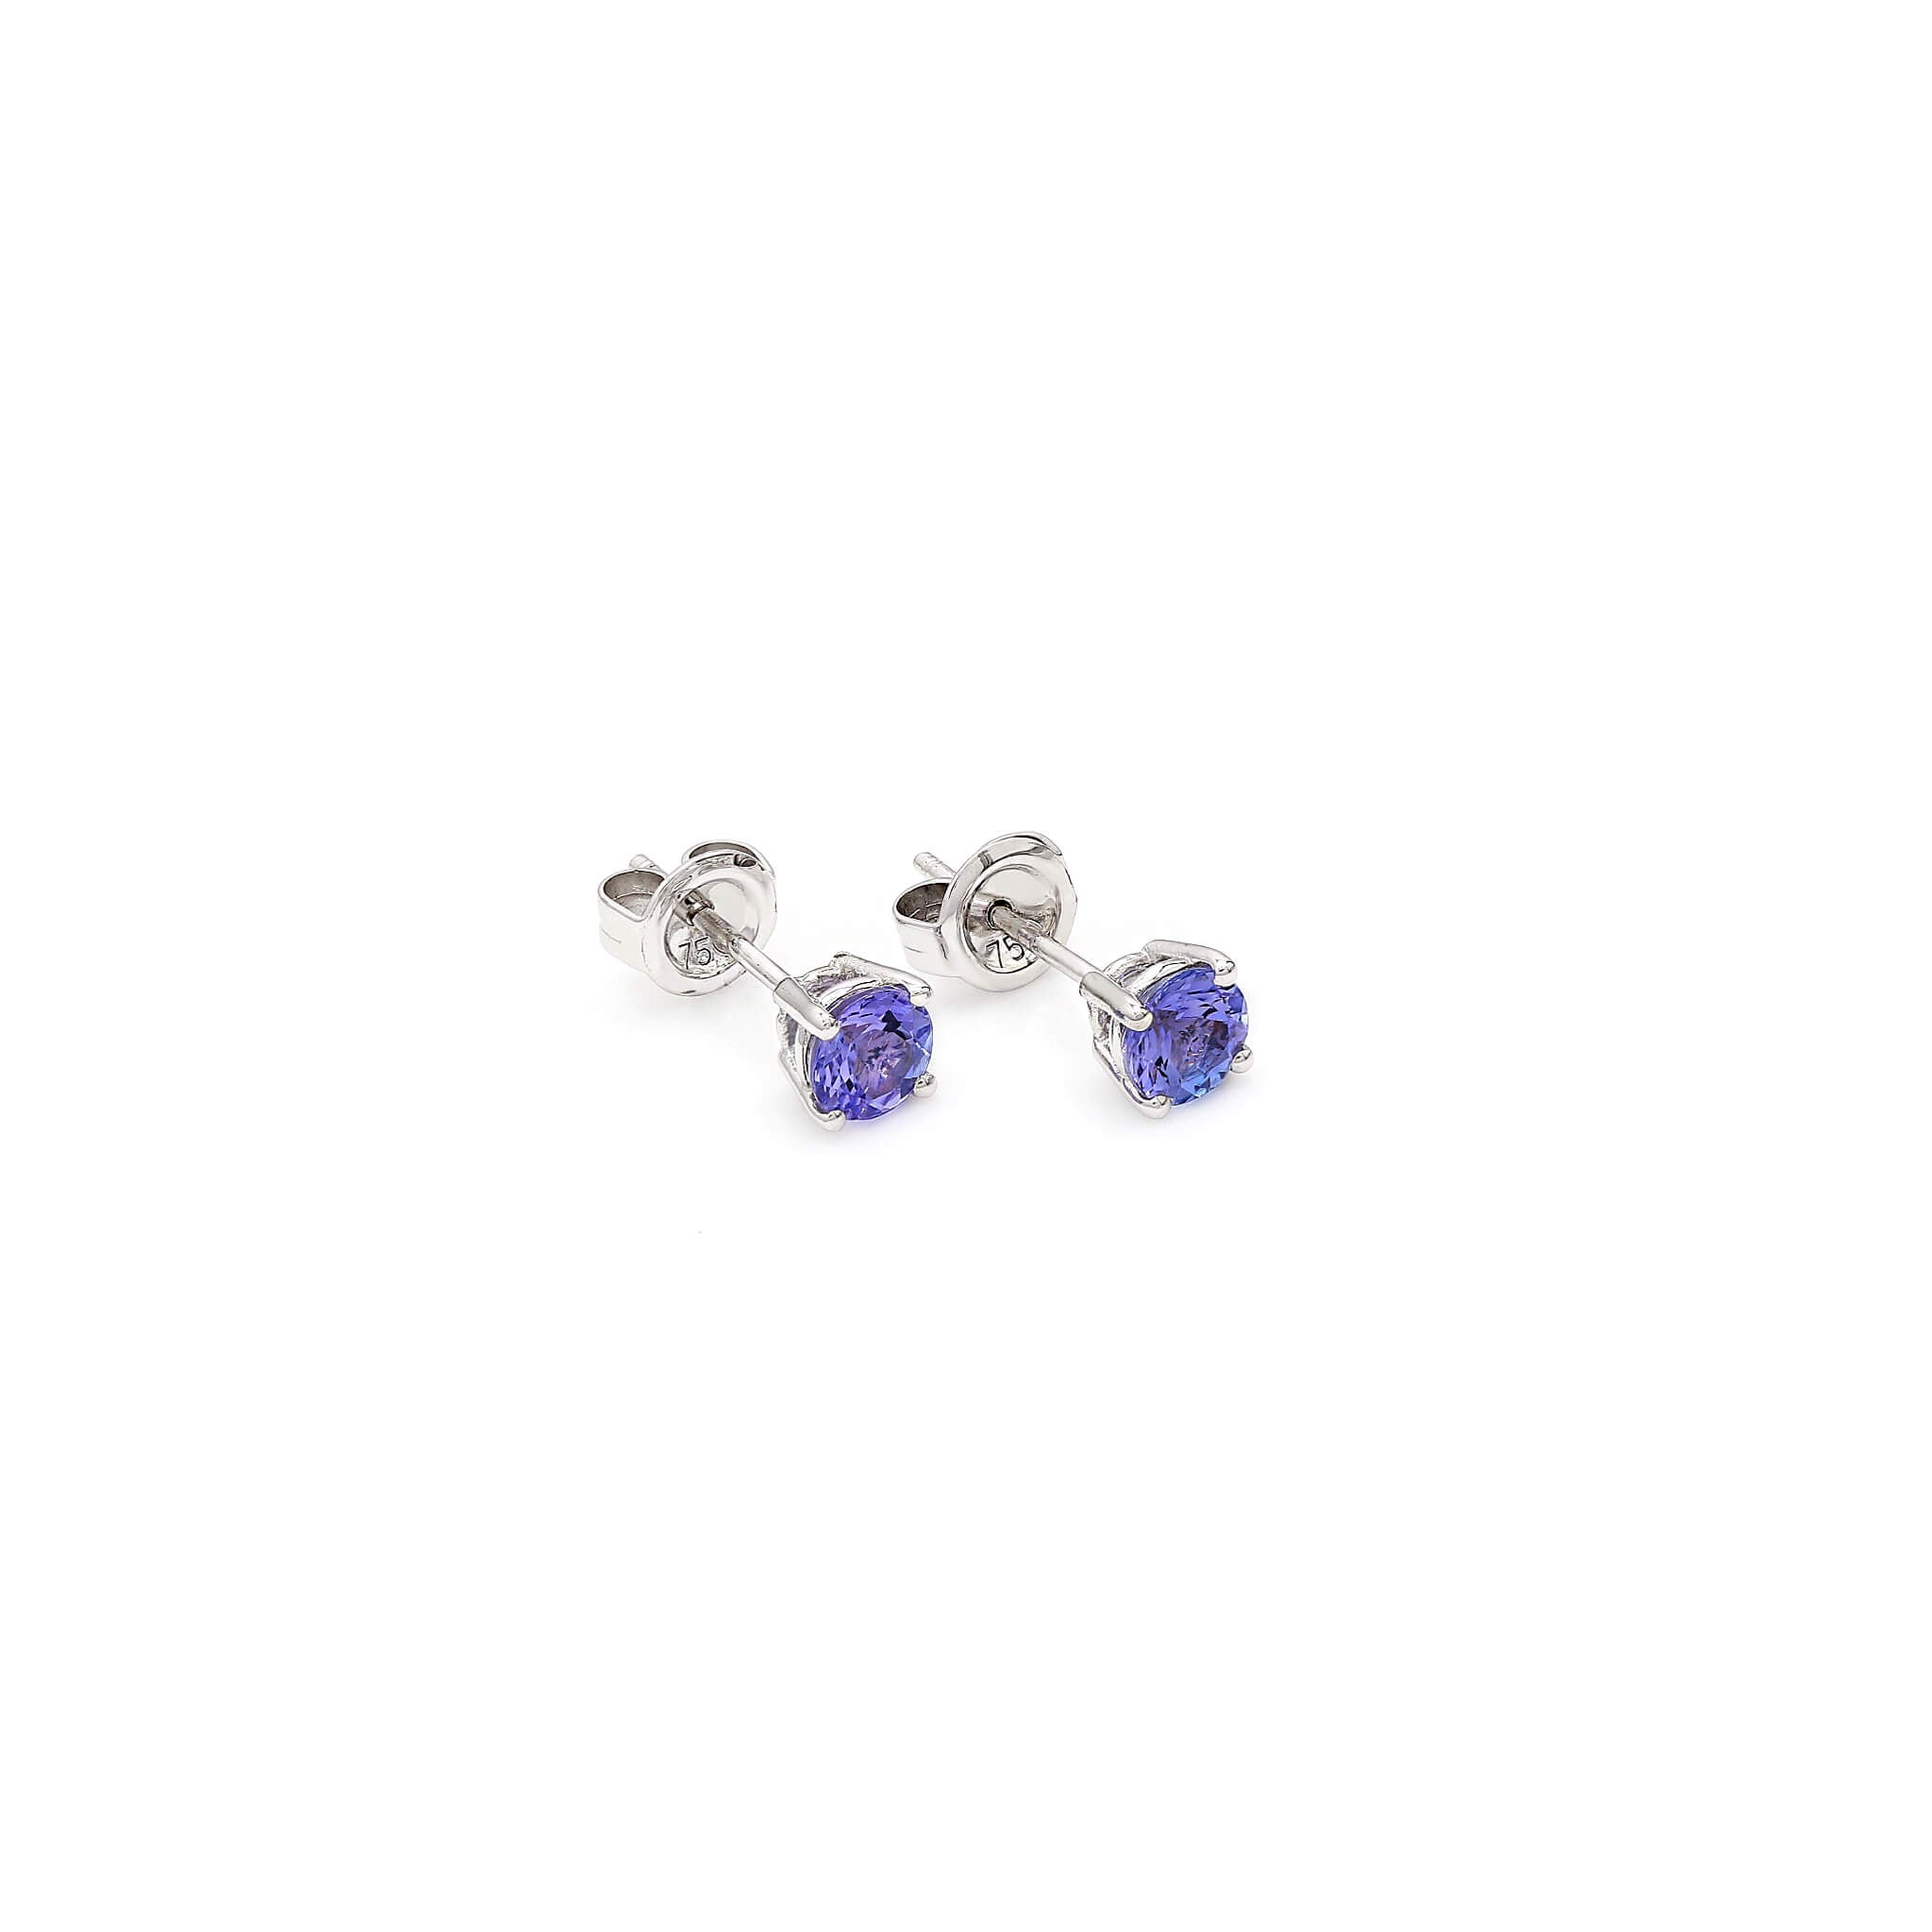 Shimansky - Tanzanite Solitaire Stud Earrings 0.70ct crafted in 14K White Gold